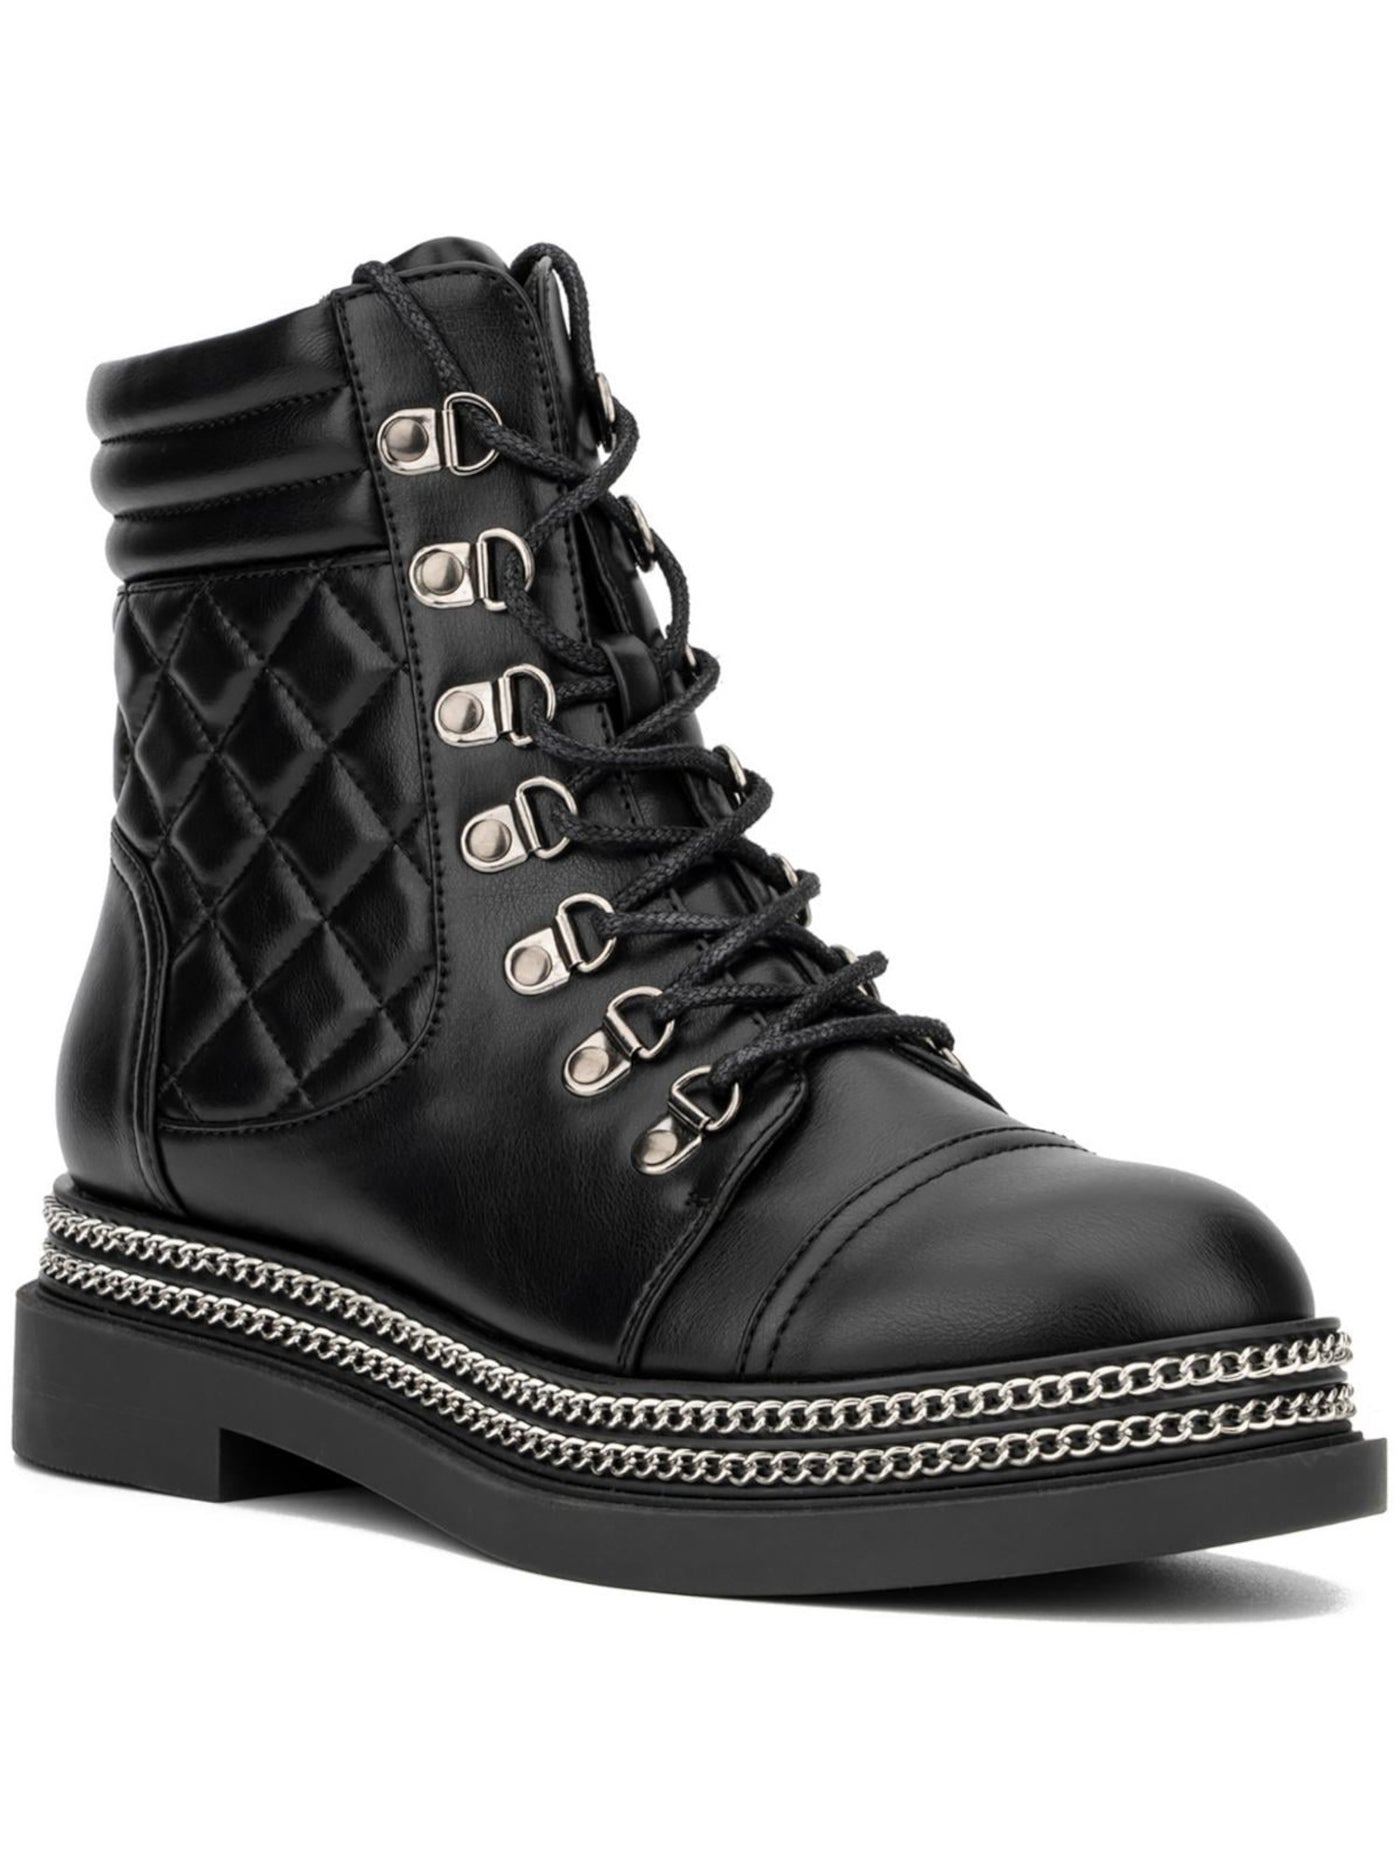 NEW YORK & CO Womens Black Quilted Back Chain Detail Lace Up Padded Cuff Padded Katelynn Round Toe Block Heel Zip-Up Combat Boots 7